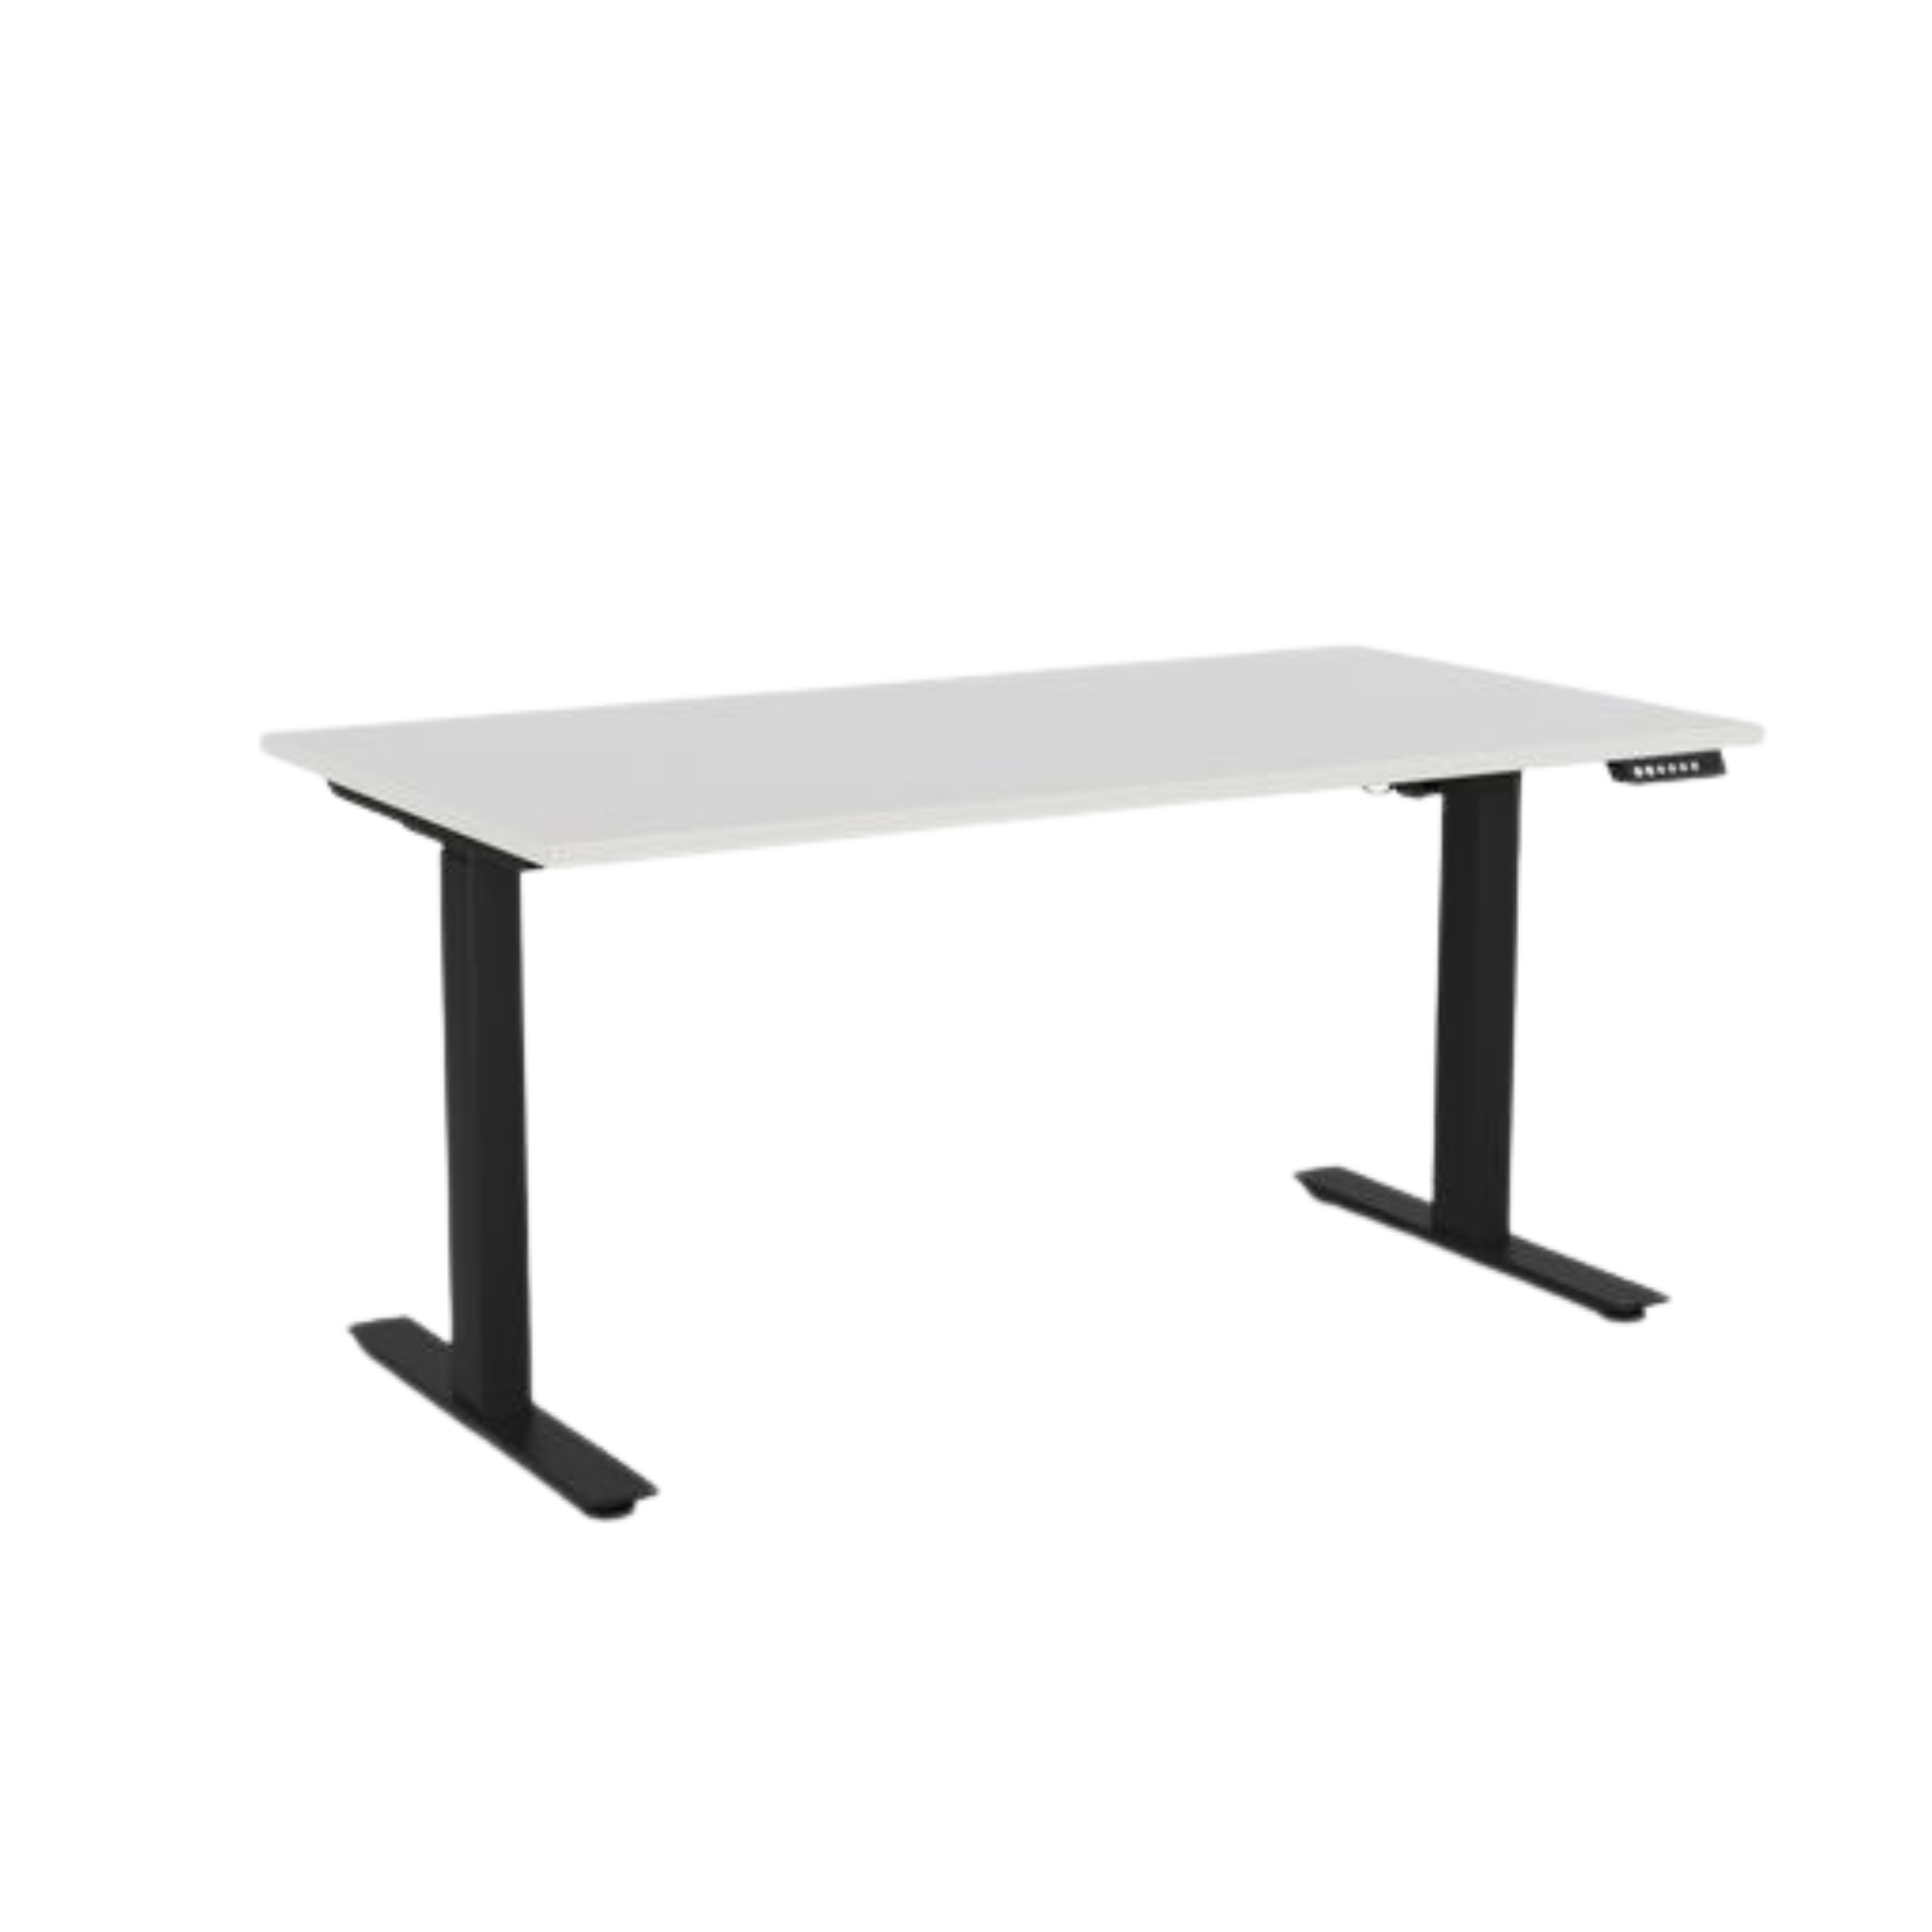 Agile 2 electric sit to stand desk with black frame and white top